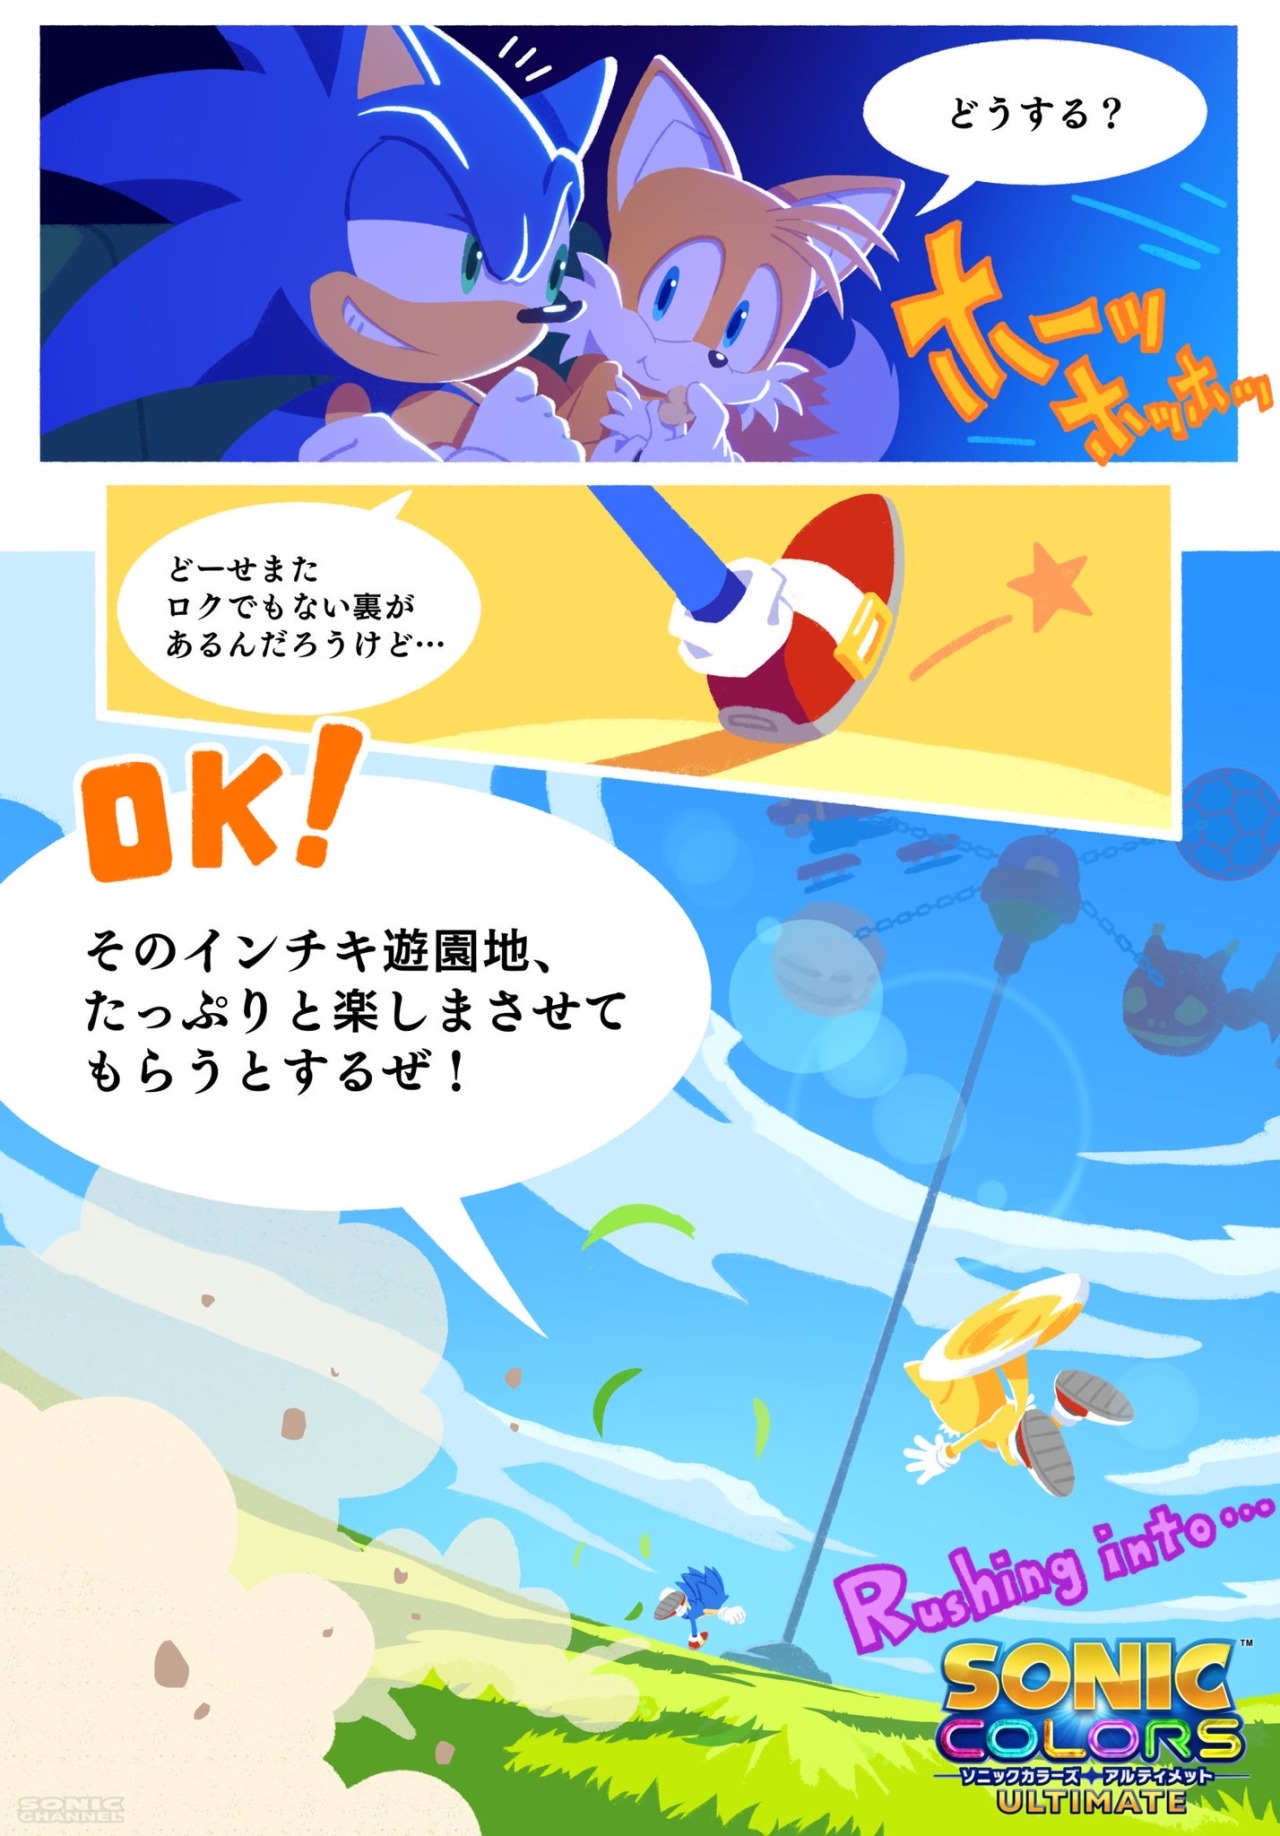 Encyclopedia Sonnica — Official Sonic Colours comic. Might translate this...